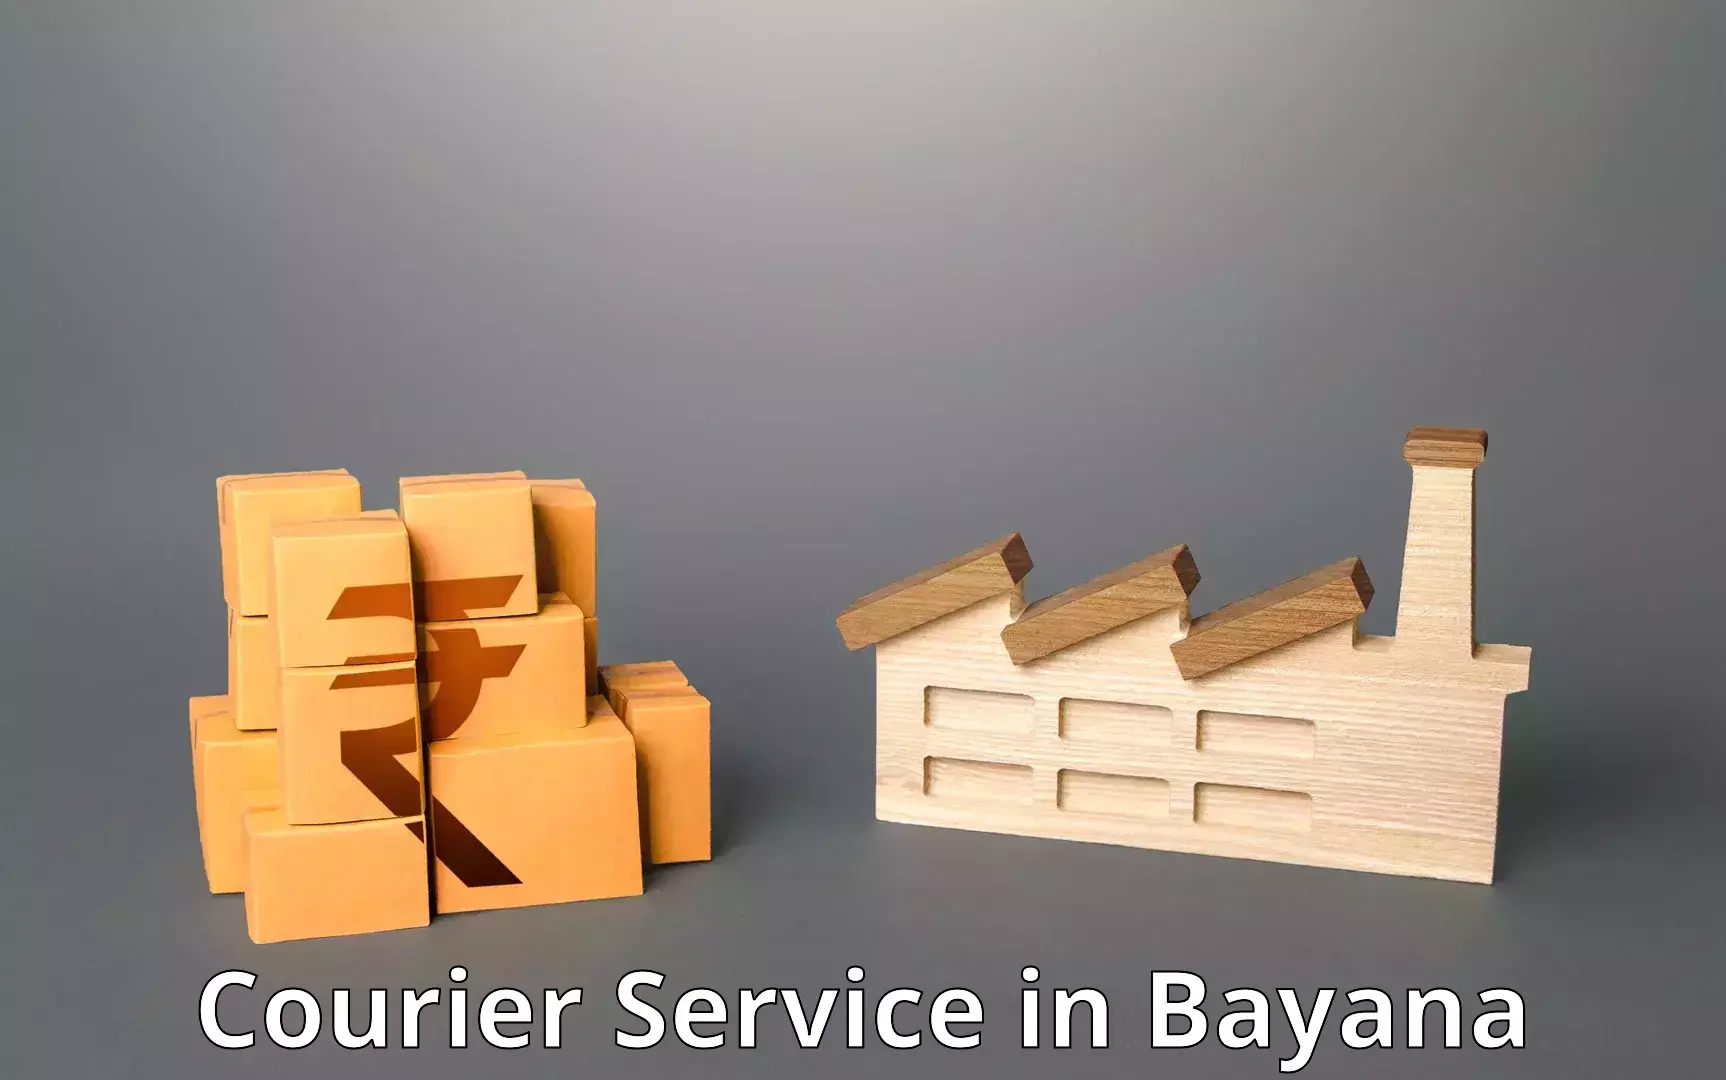 Package tracking in Bayana